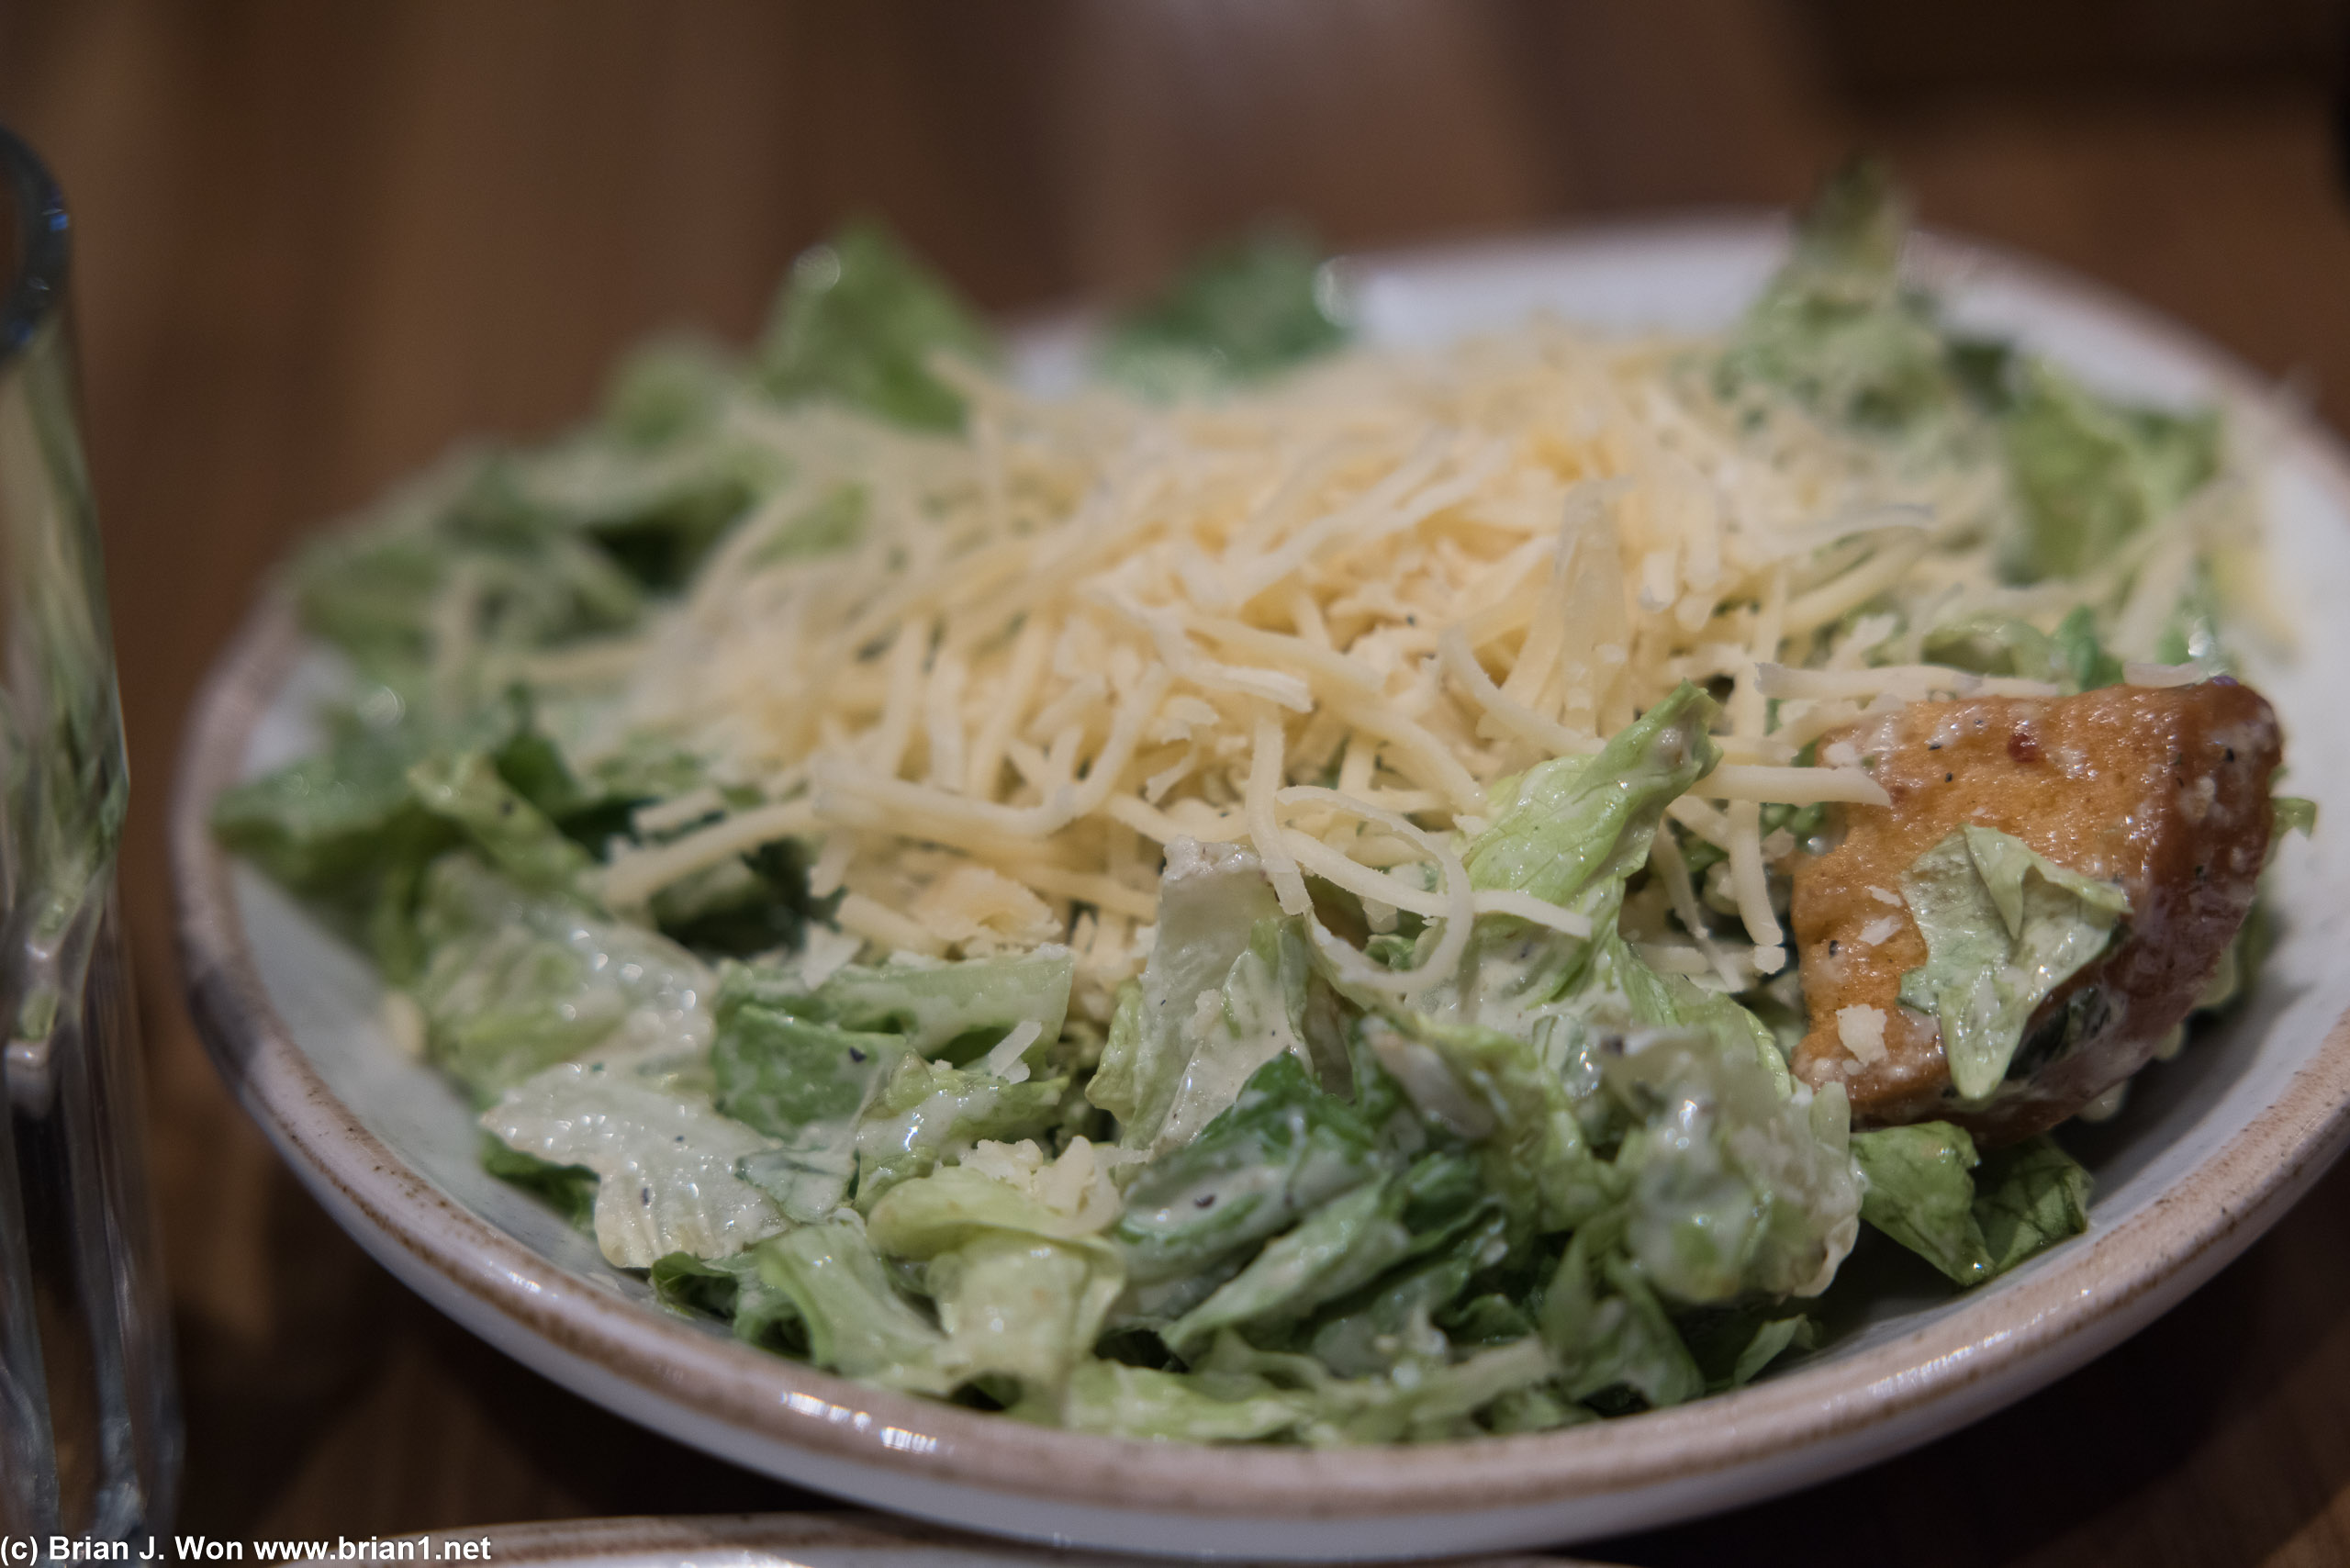 Want some salad with your cheese and dressing?